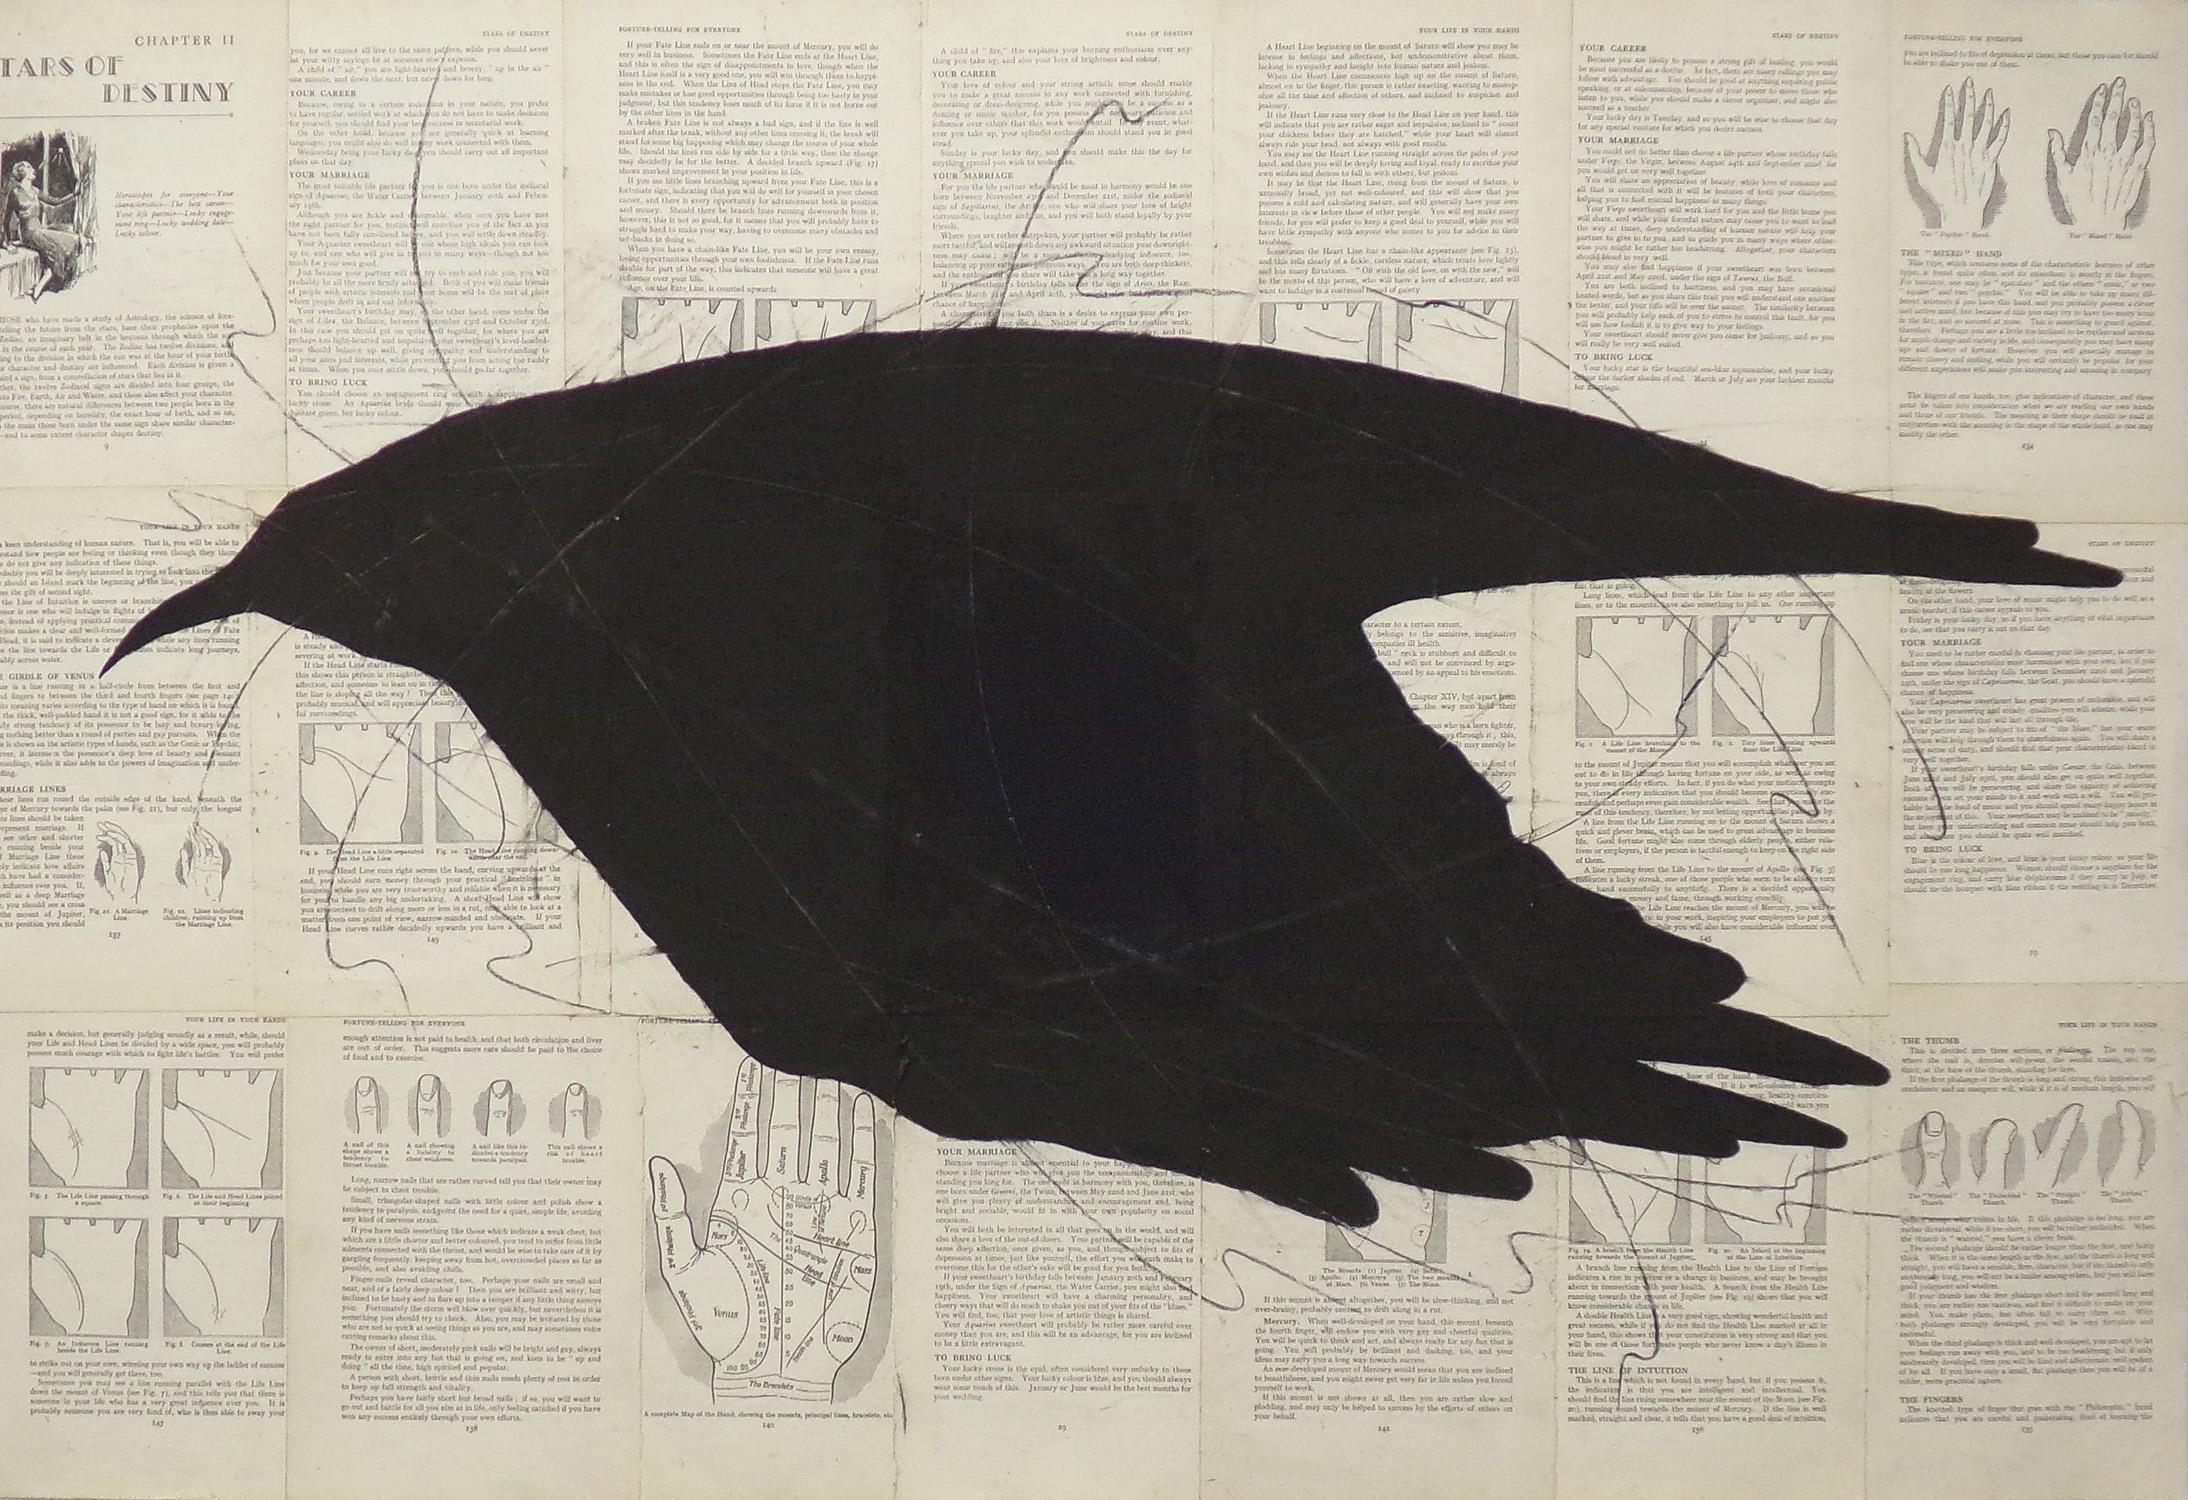 Raven Reads the Lines: Chalk Drawing of Black Bird on Vintage Book Pages